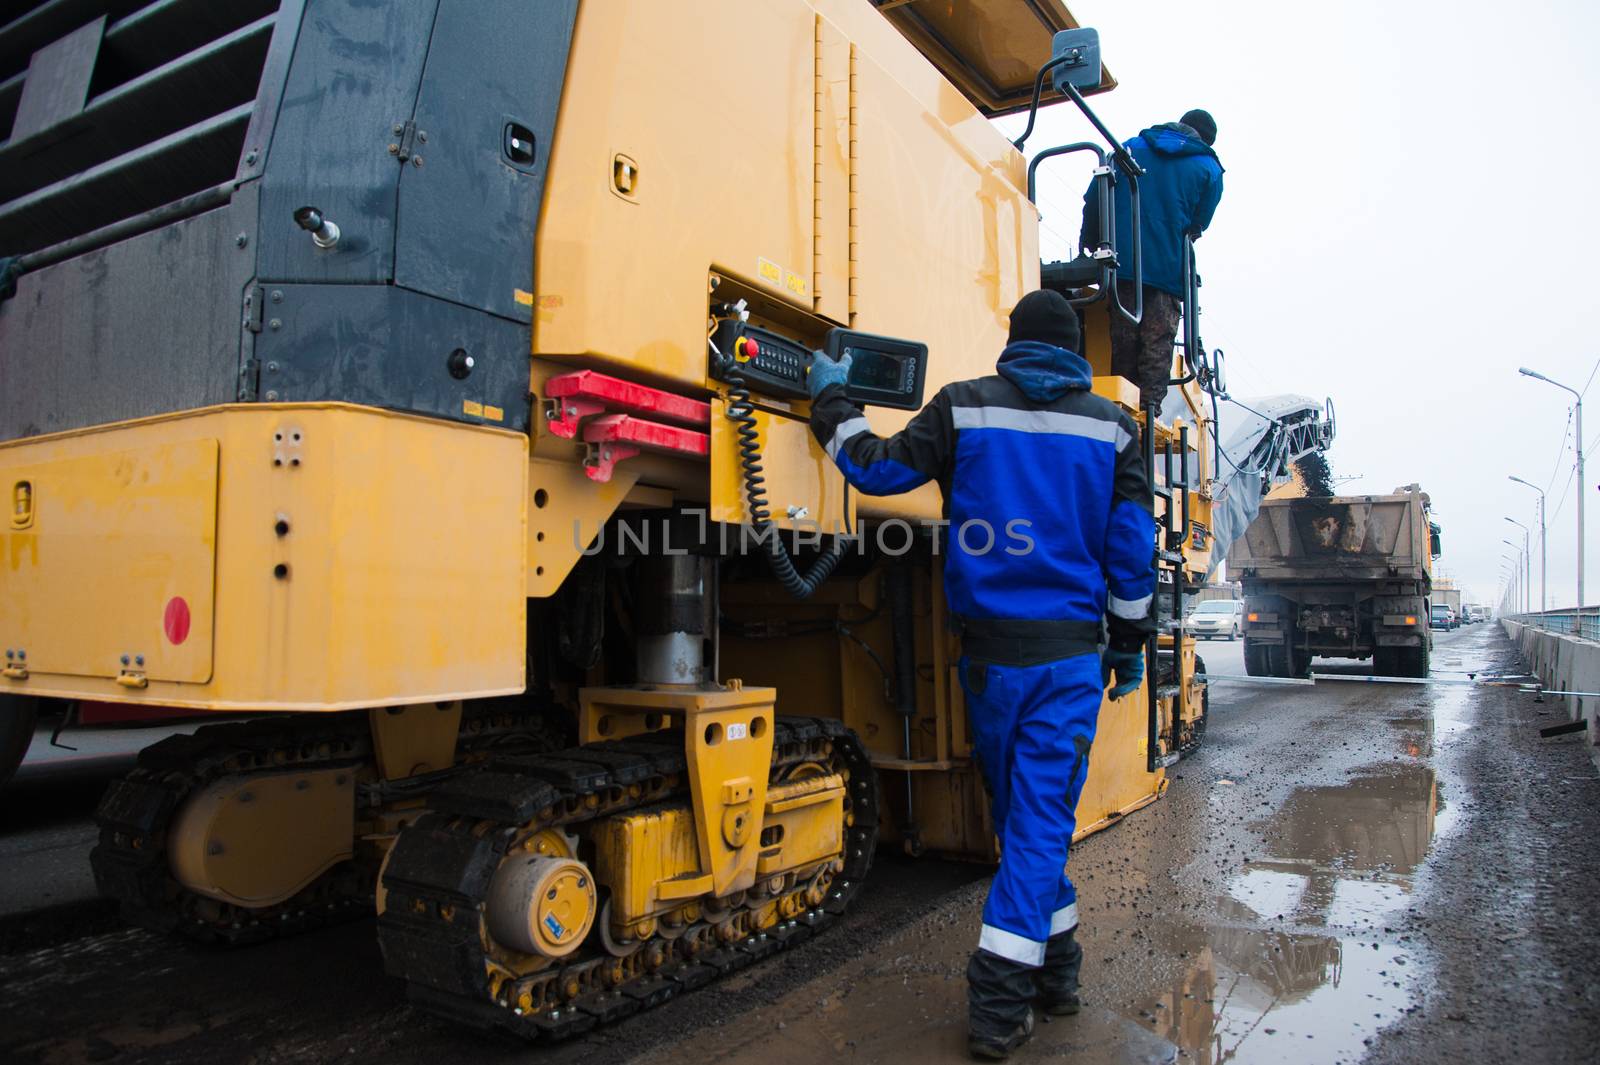 Repair of asphalt pavement of the road. Road cold milling machine removes the old asphalt and loading into a dump truck